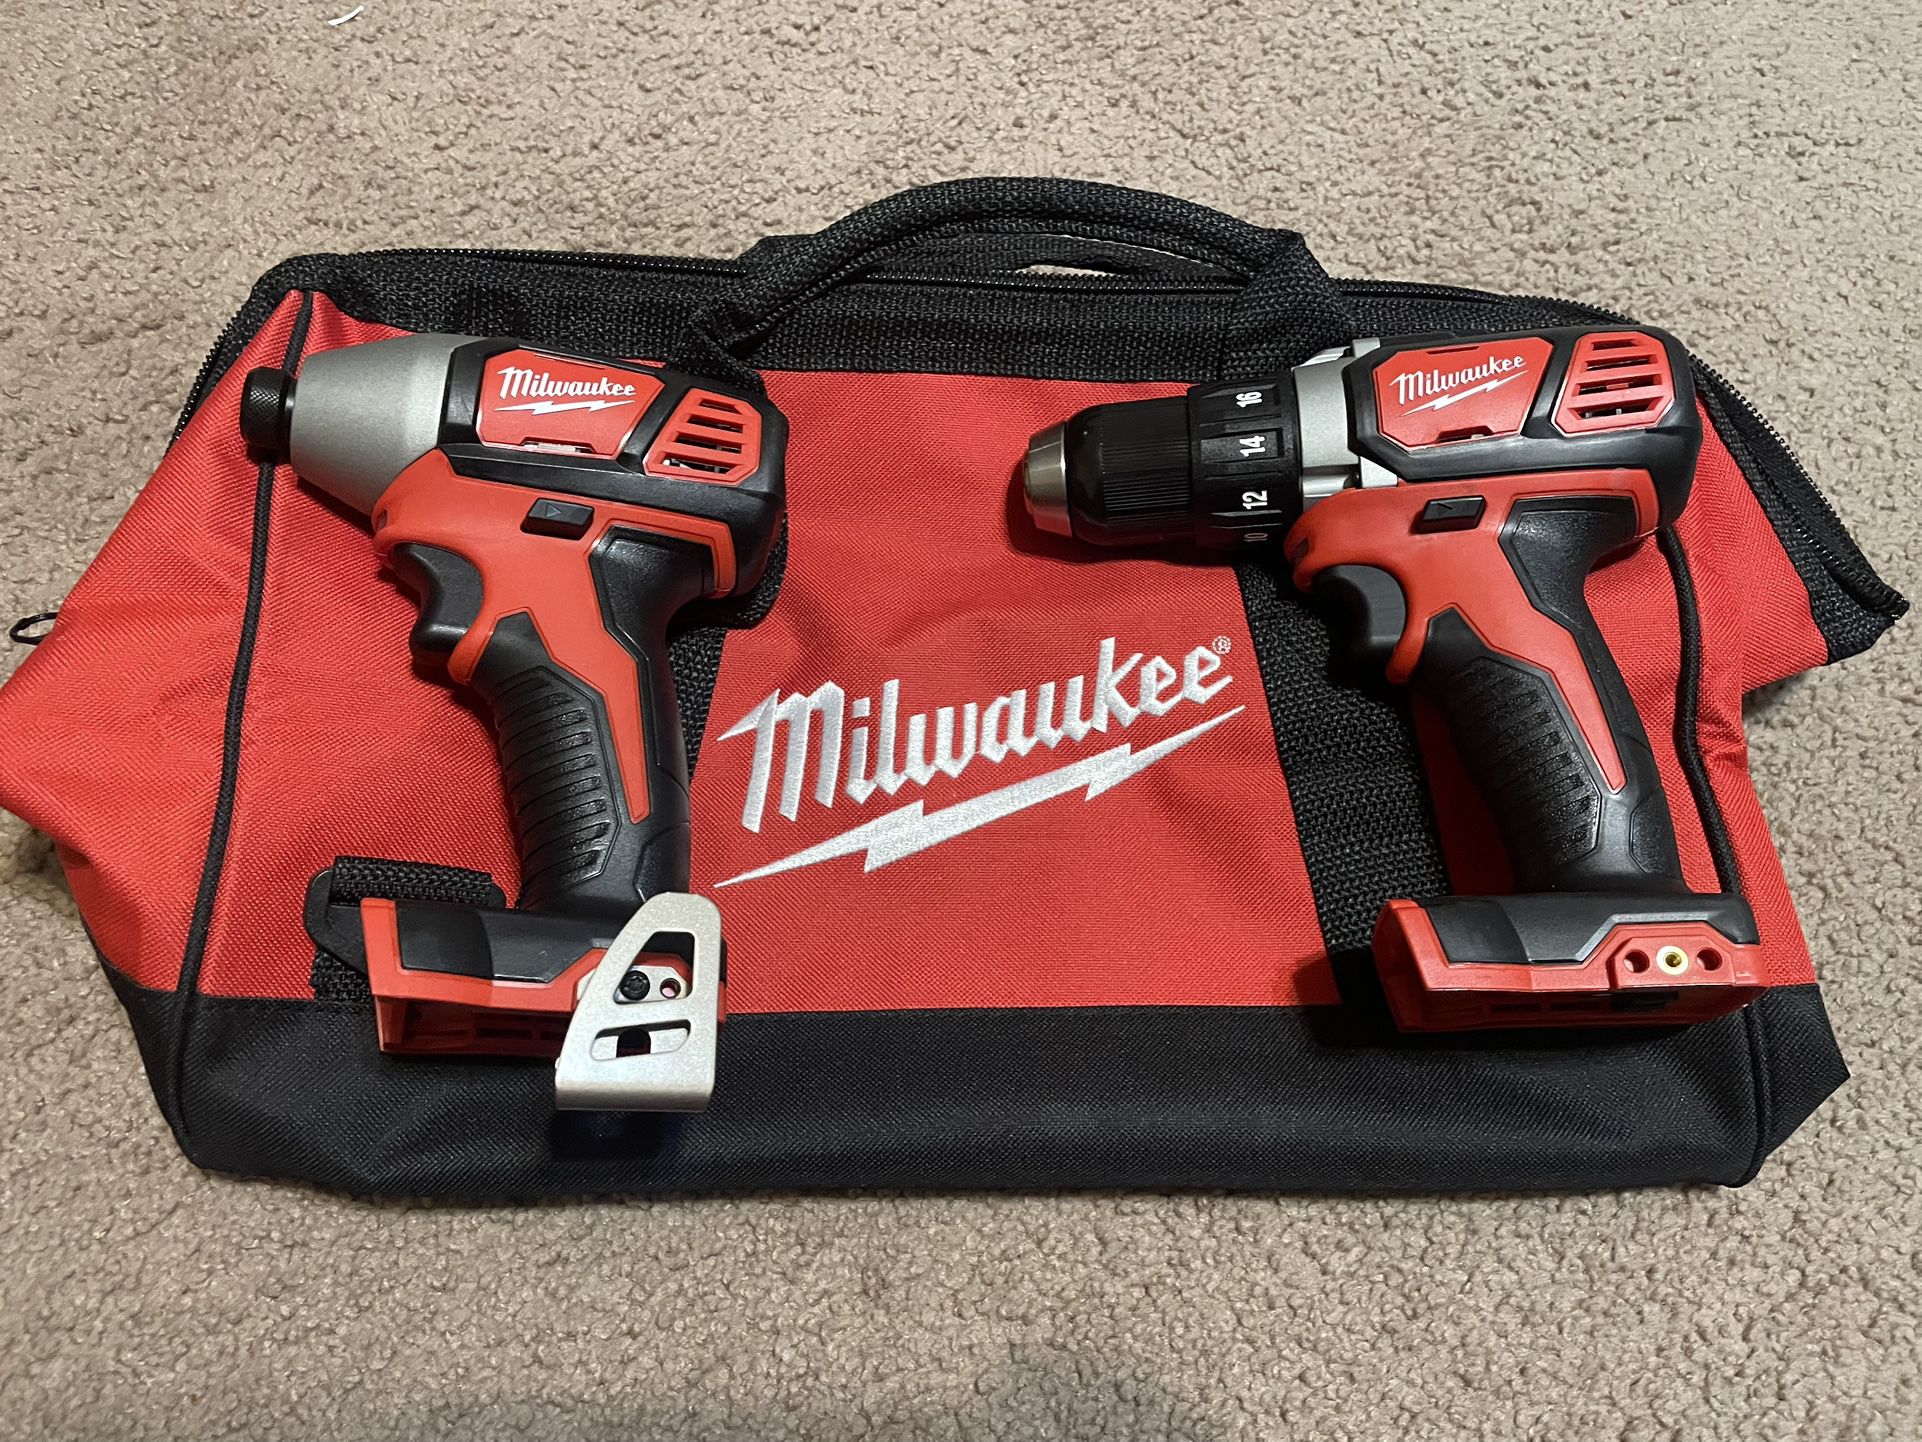 Milwaukee M18 Li-Ion Compact Cordless Power Tool Set, 1/2in. Drill/Driver & 1/4in. Hex Impact Driver and bag 